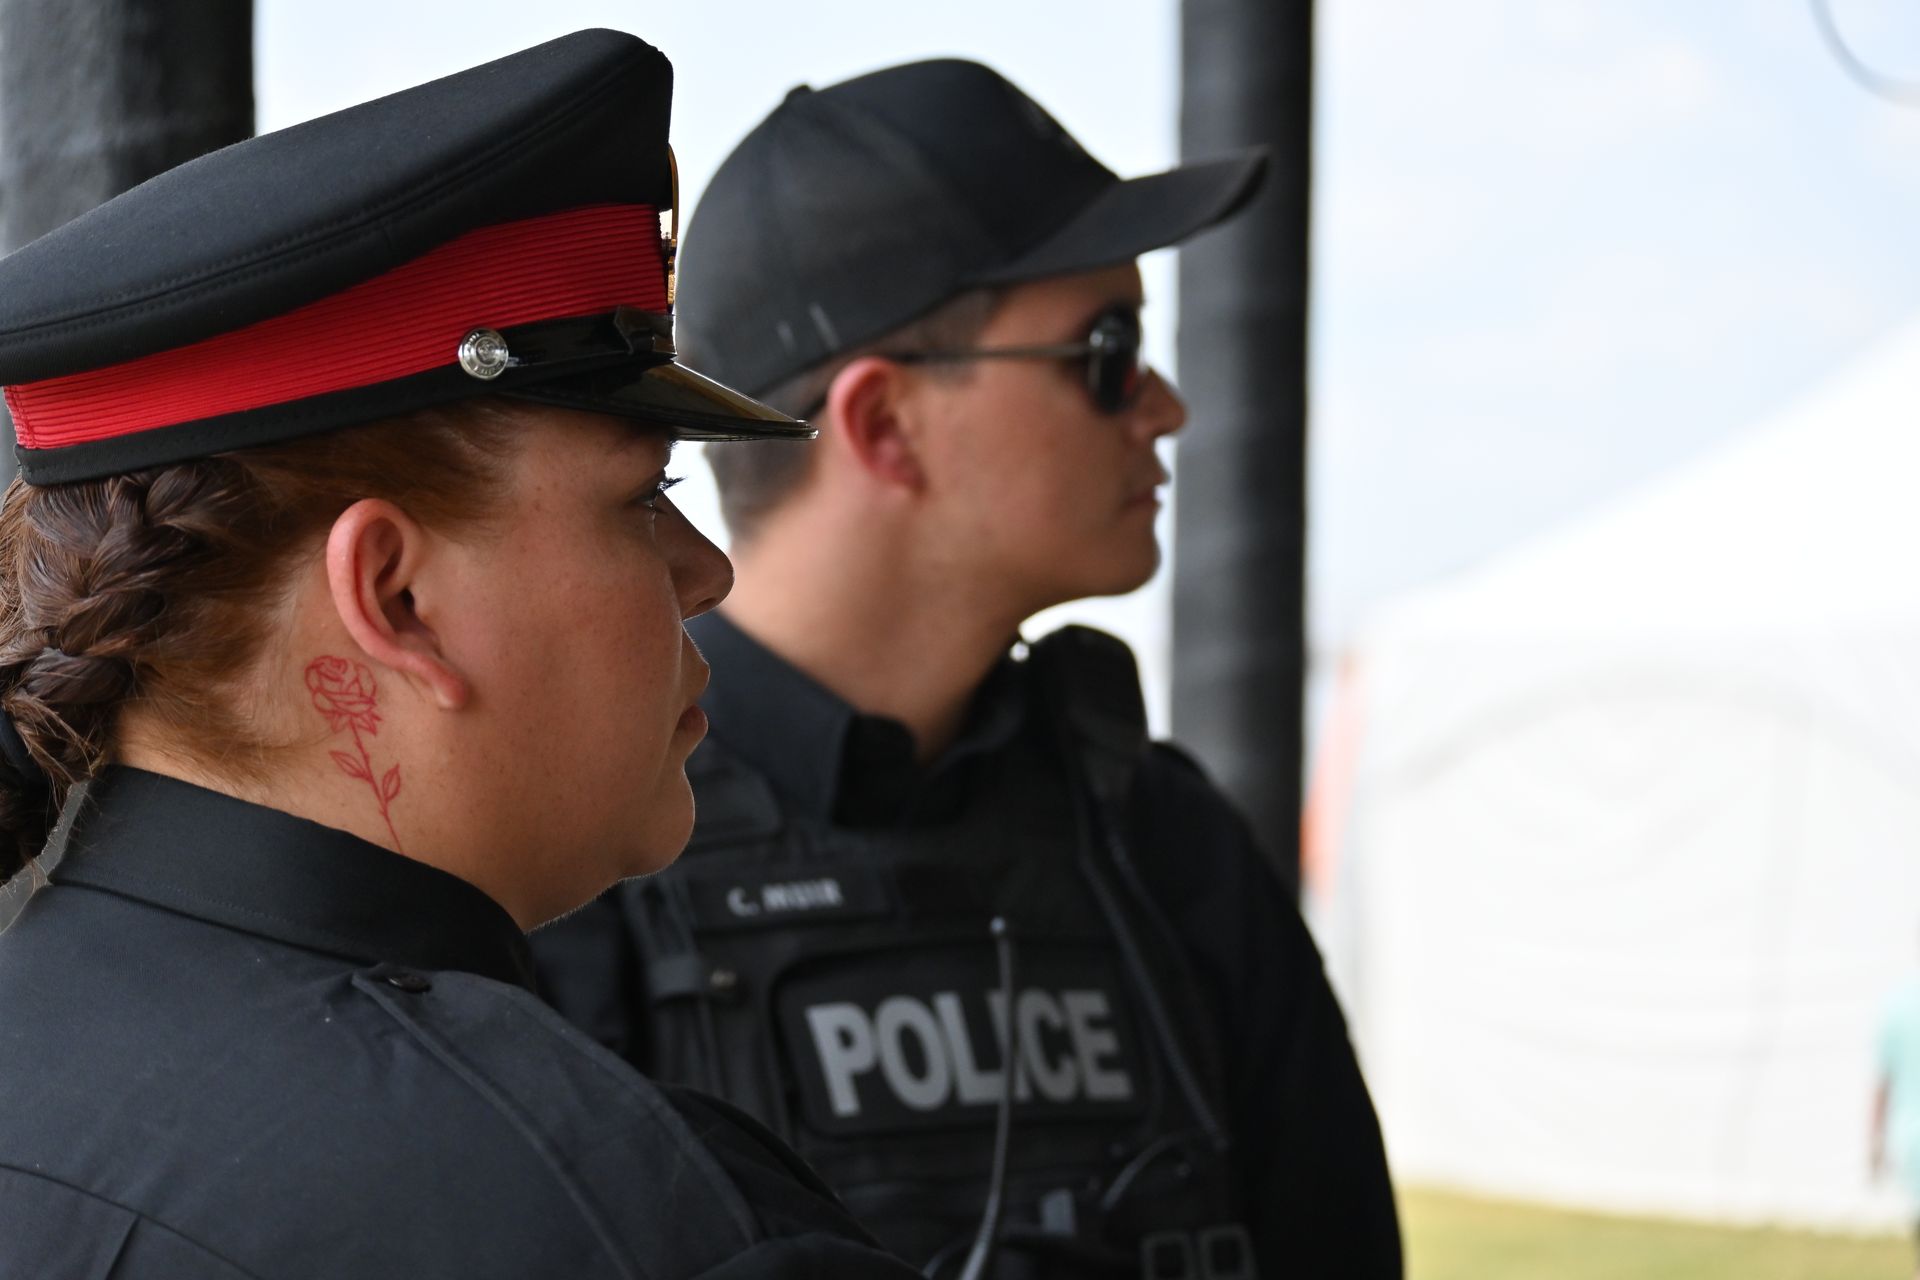 MFNPS-Manitoba First Nations Police Service - Crisis Support Officers